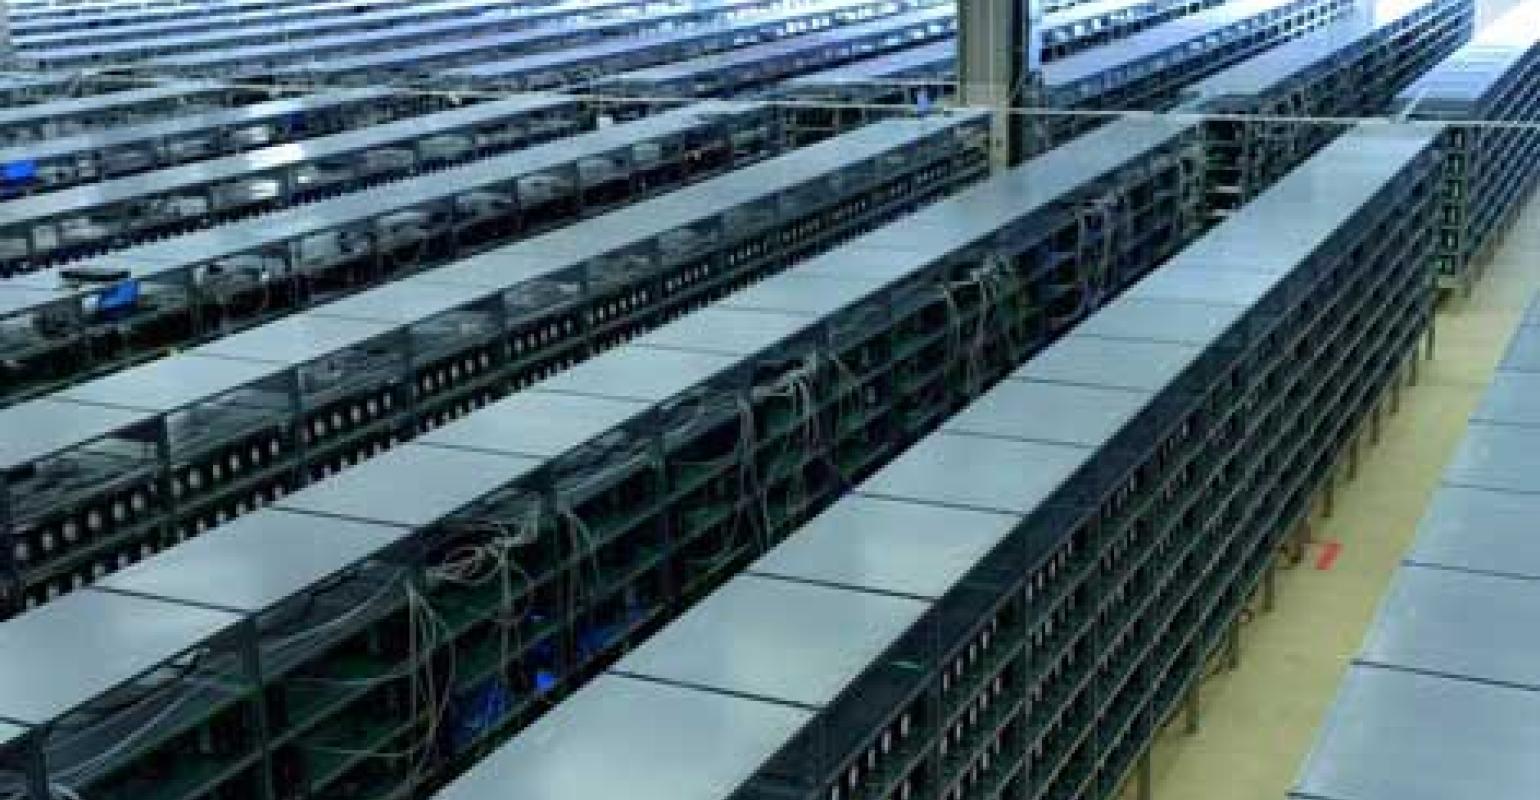 Massive Bitcoin Mines Spring Up In Warehouses Data Center Knowledge